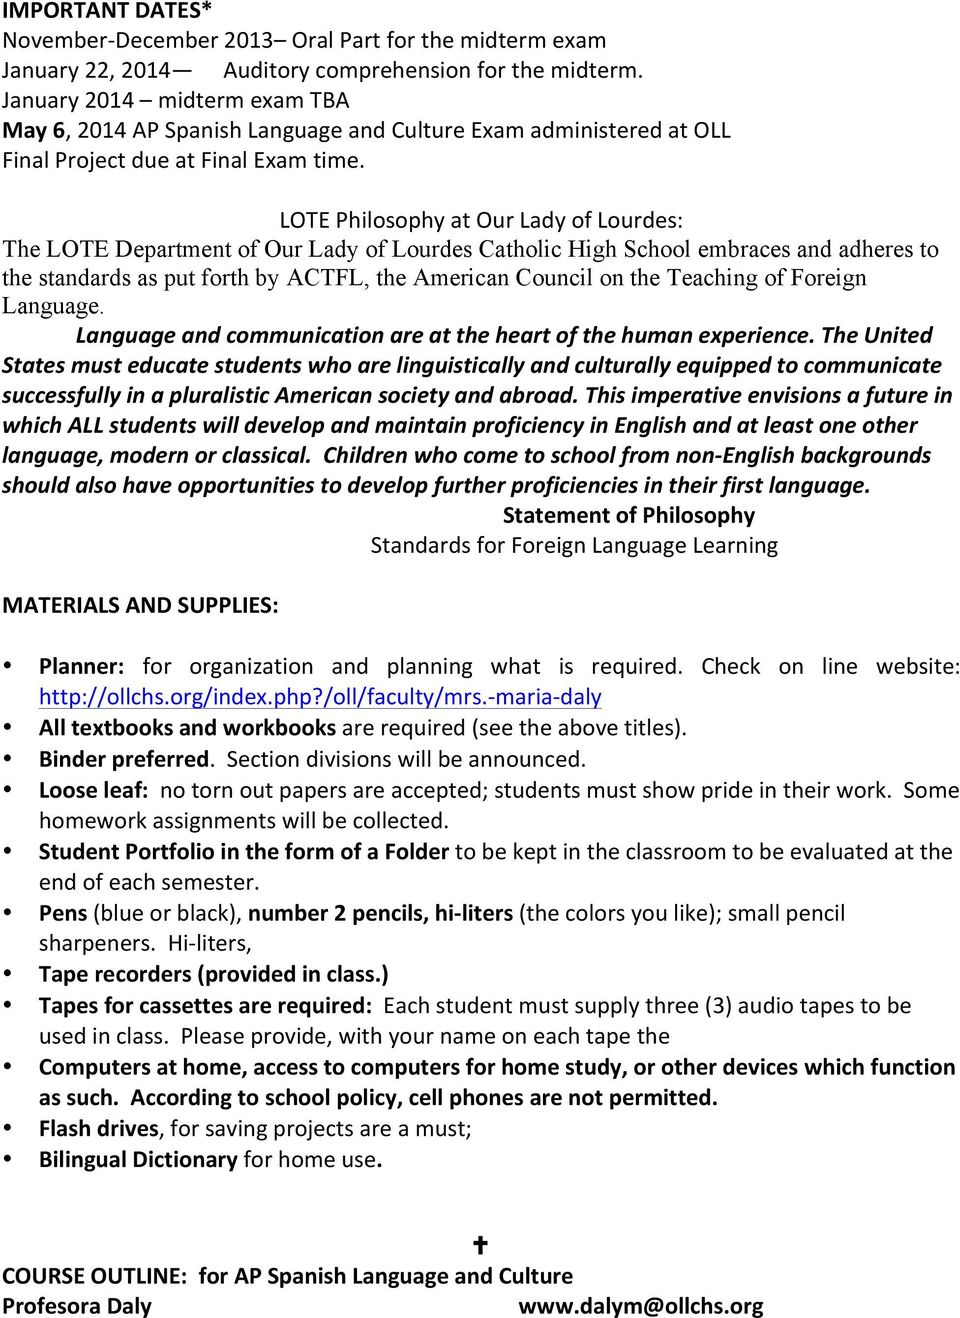 LOTE Philosophy at Our Lady of Lourdes: The LOTE Department of Our Lady of Lourdes Catholic High School embraces and adheres to the standards as put forth by ACTFL, the American Council on the